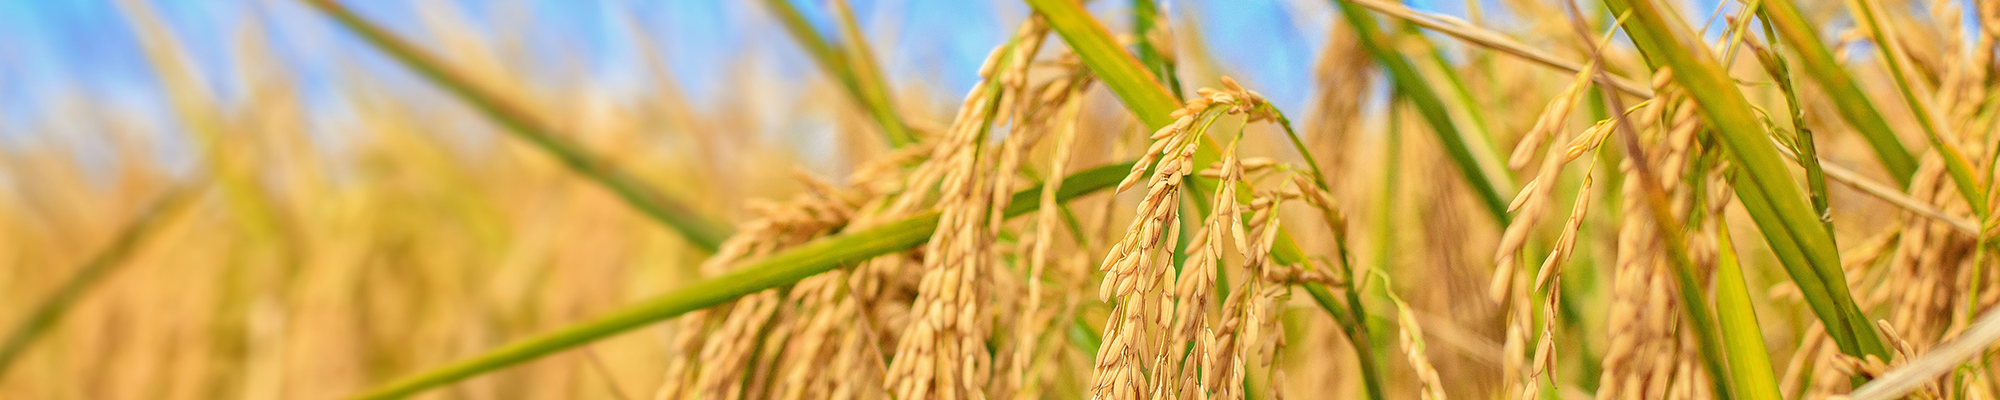 Close up image of a rice plant